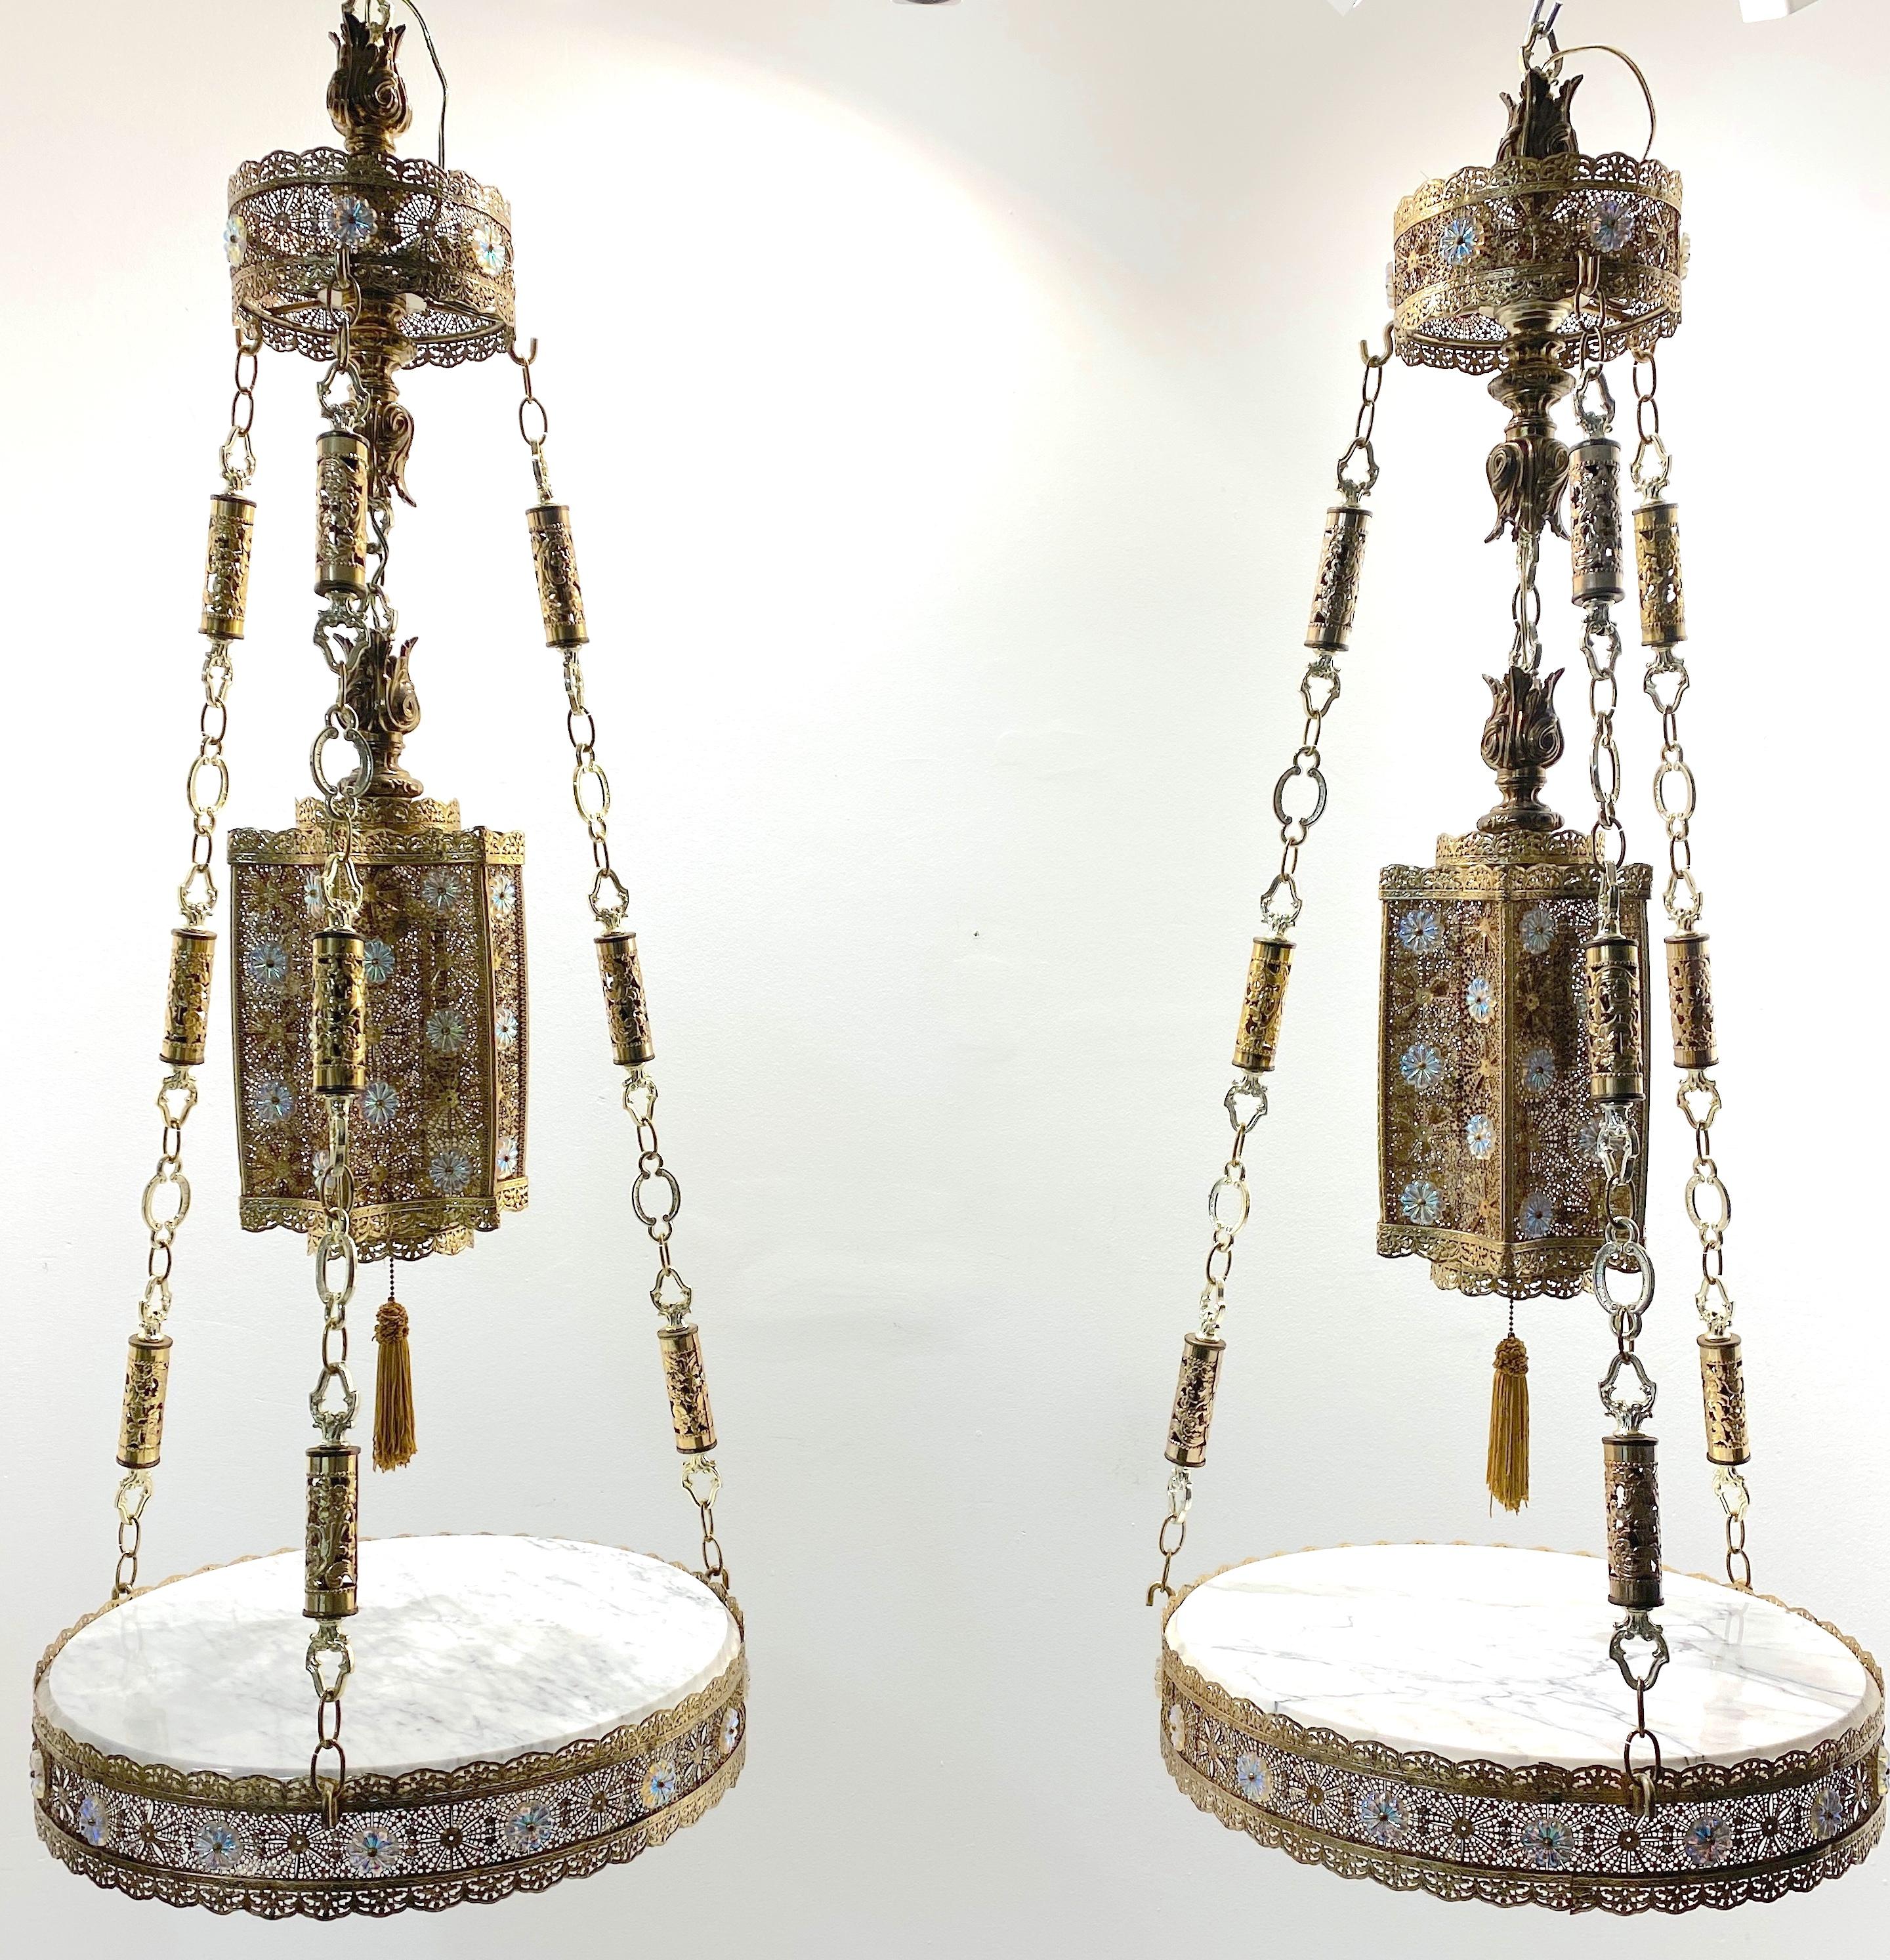 Pair of Exotic Moorish Hanging Brass & Crystal Lantern & Marble Side Tables 
Italy, Circa 1960s

A pair of Exotic Moorish Hanging Brass & Crystal Lanterns with Marble Side Tables, originating from Italy in the 1960s. This glamorous duo presents a